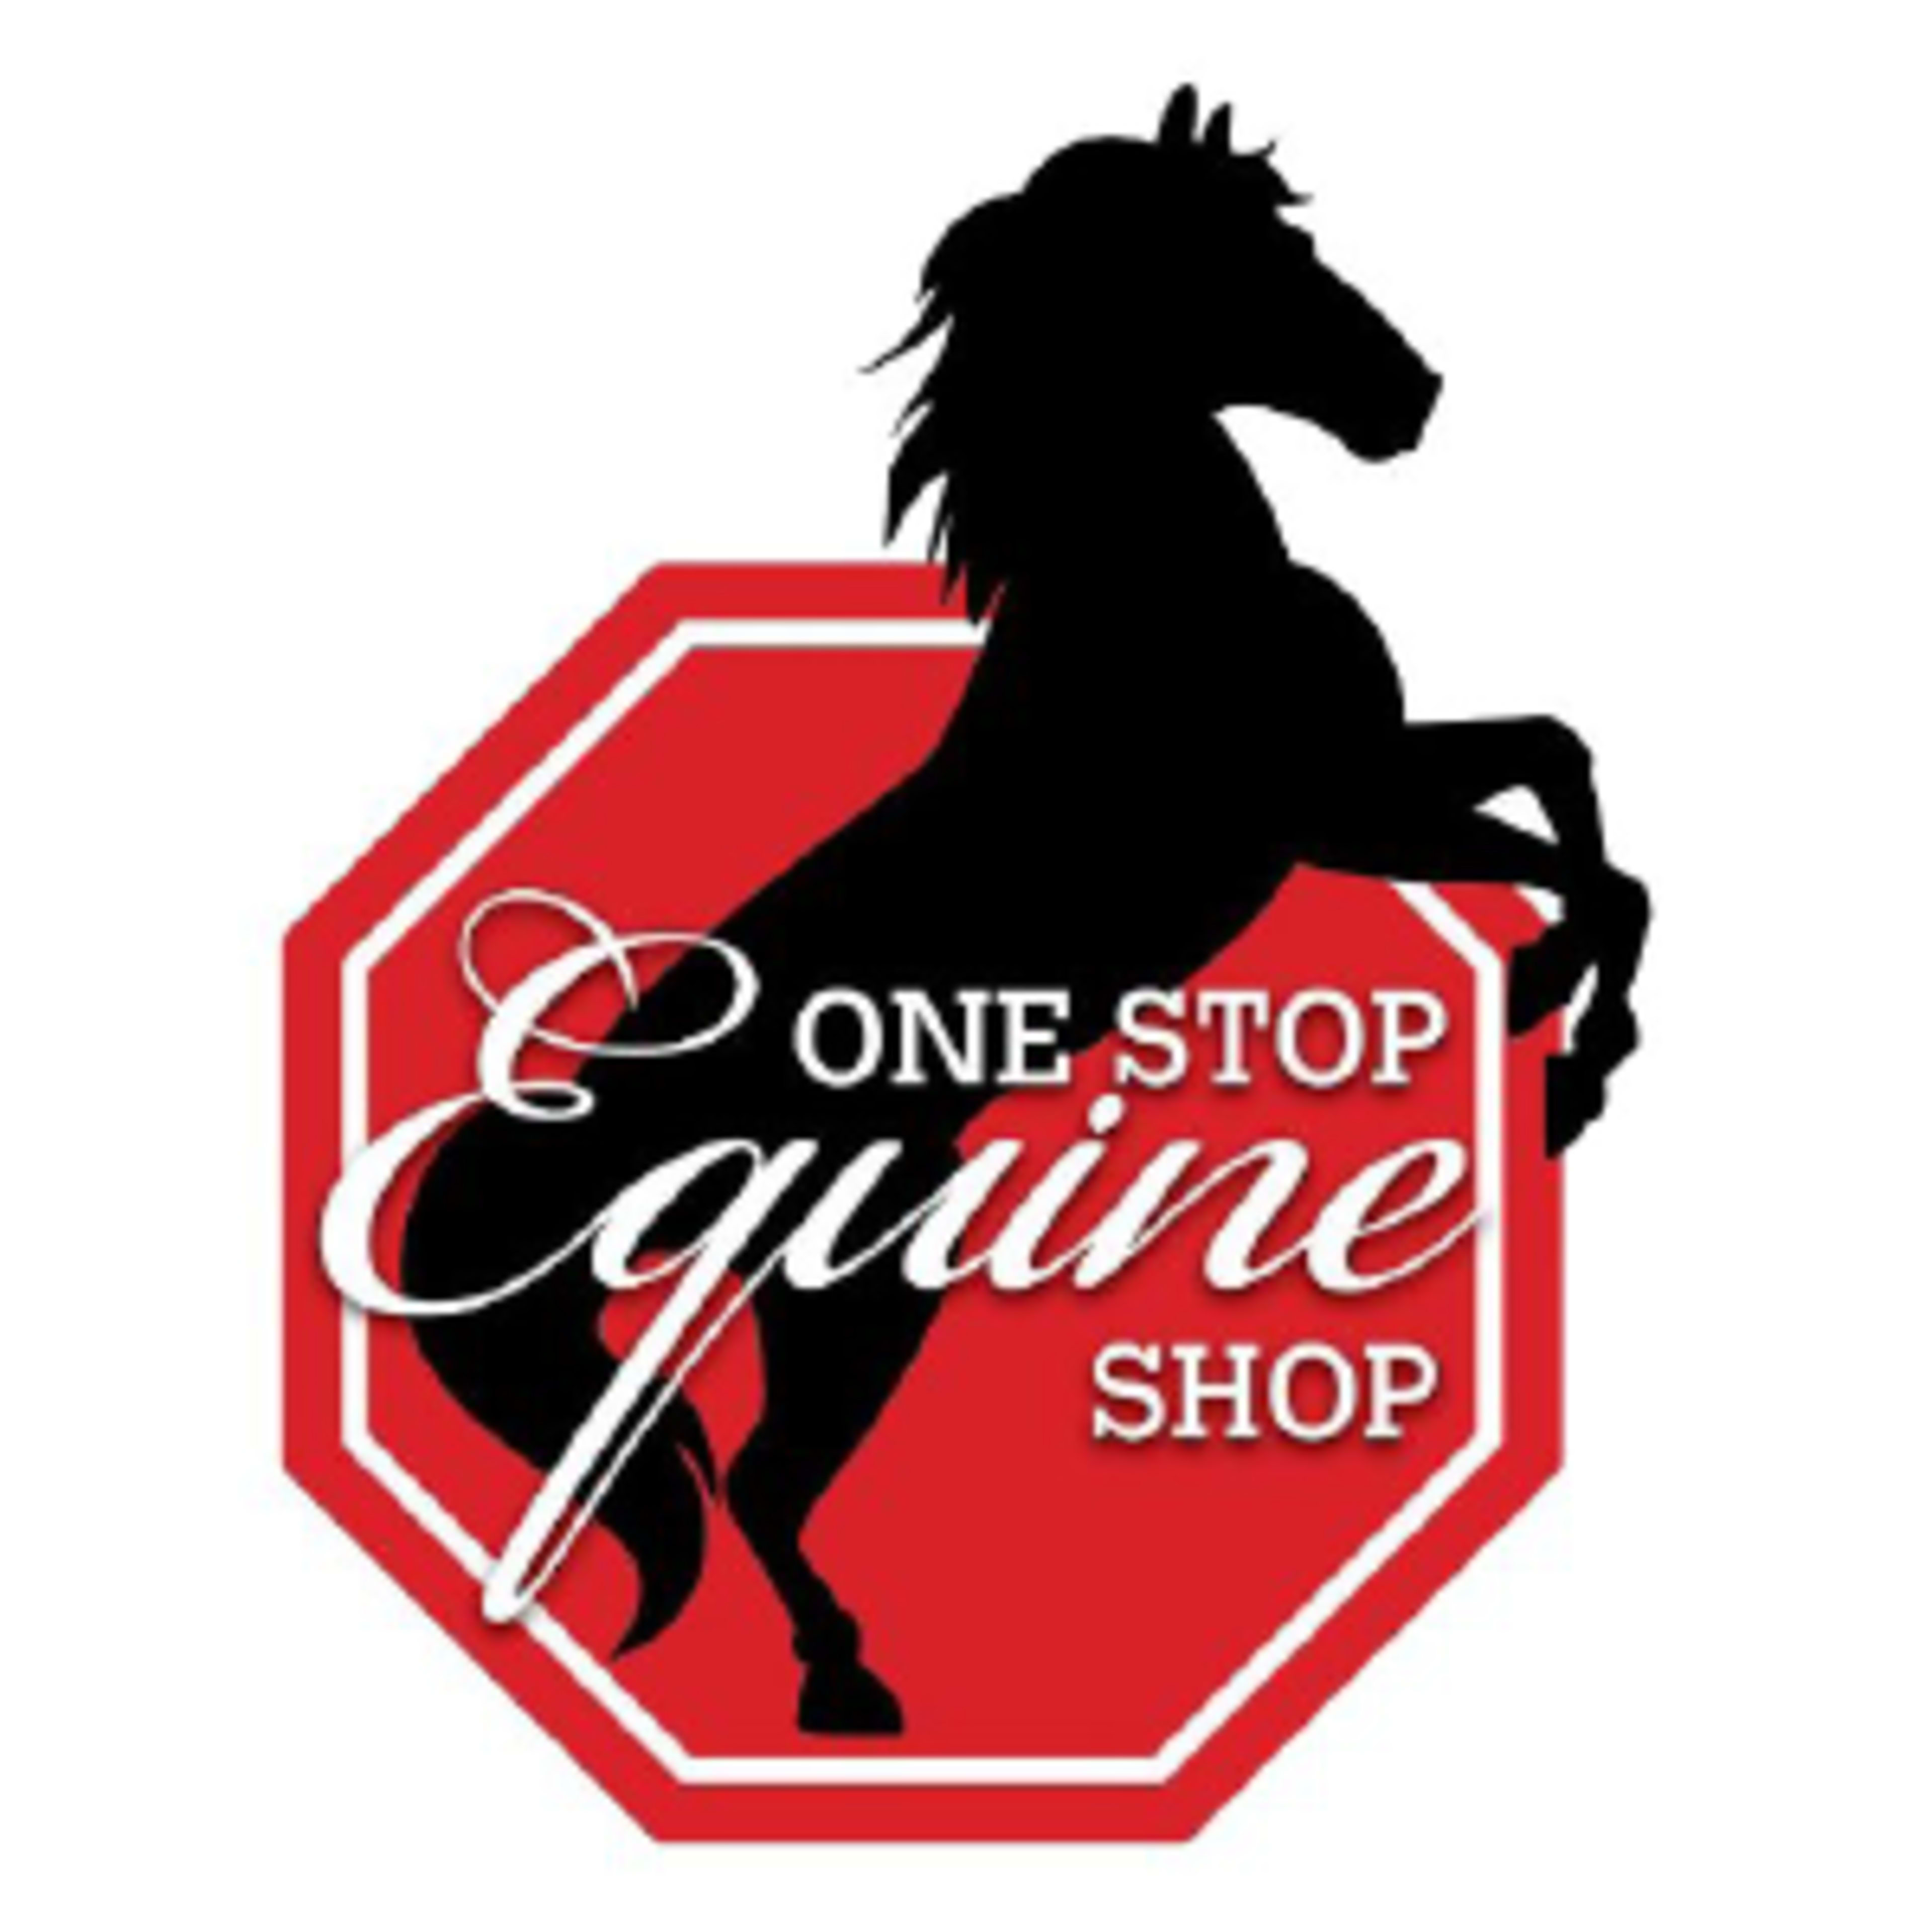 The One Stop Equine ShopCode